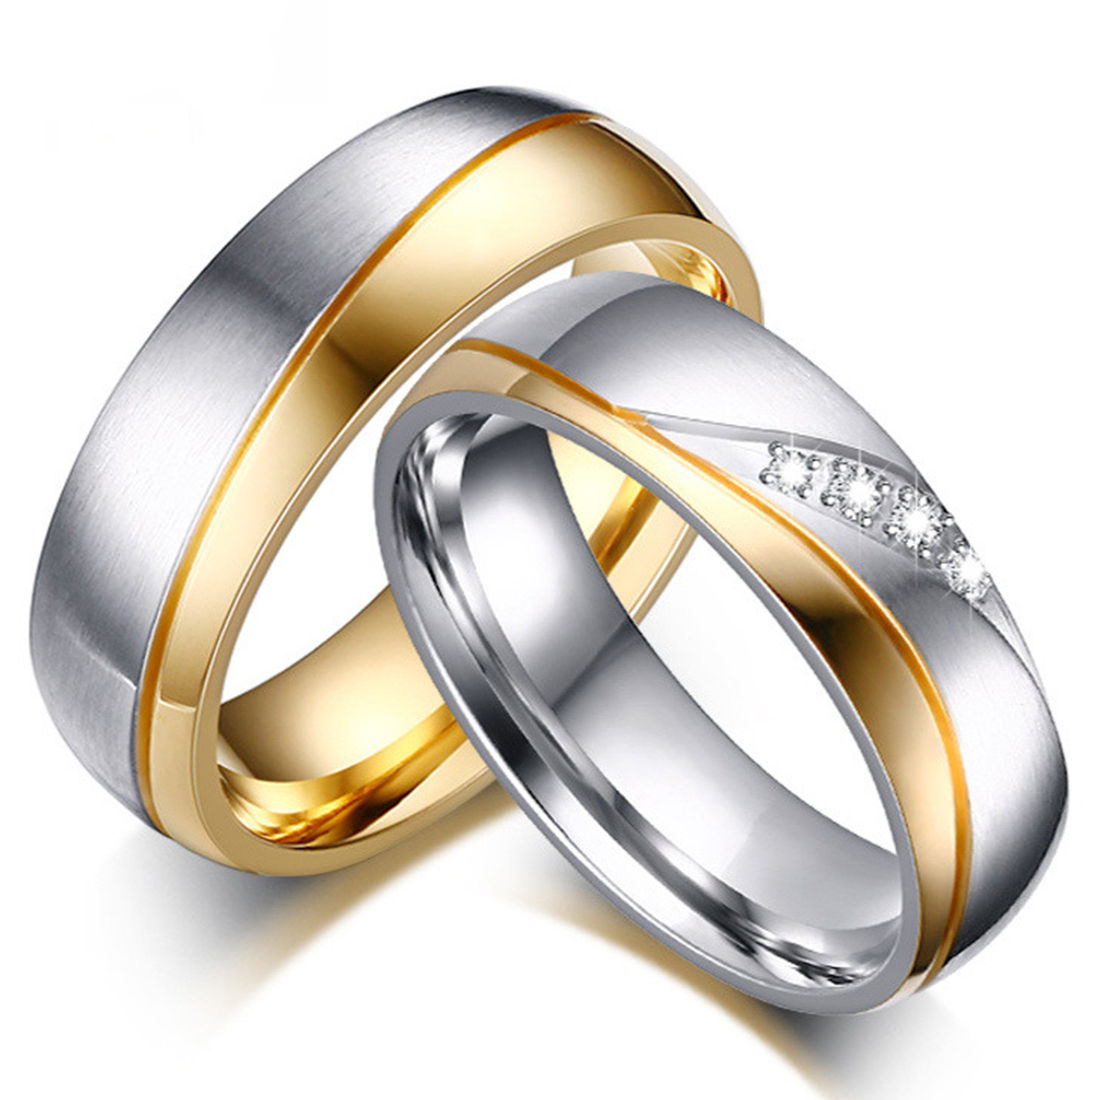 Silver Creations COUPLE BAND RING SET Alloy Gold, Rhodium Plated Ring Set  Price in India - Buy Silver Creations COUPLE BAND RING SET Alloy Gold,  Rhodium Plated Ring Set Online at Best